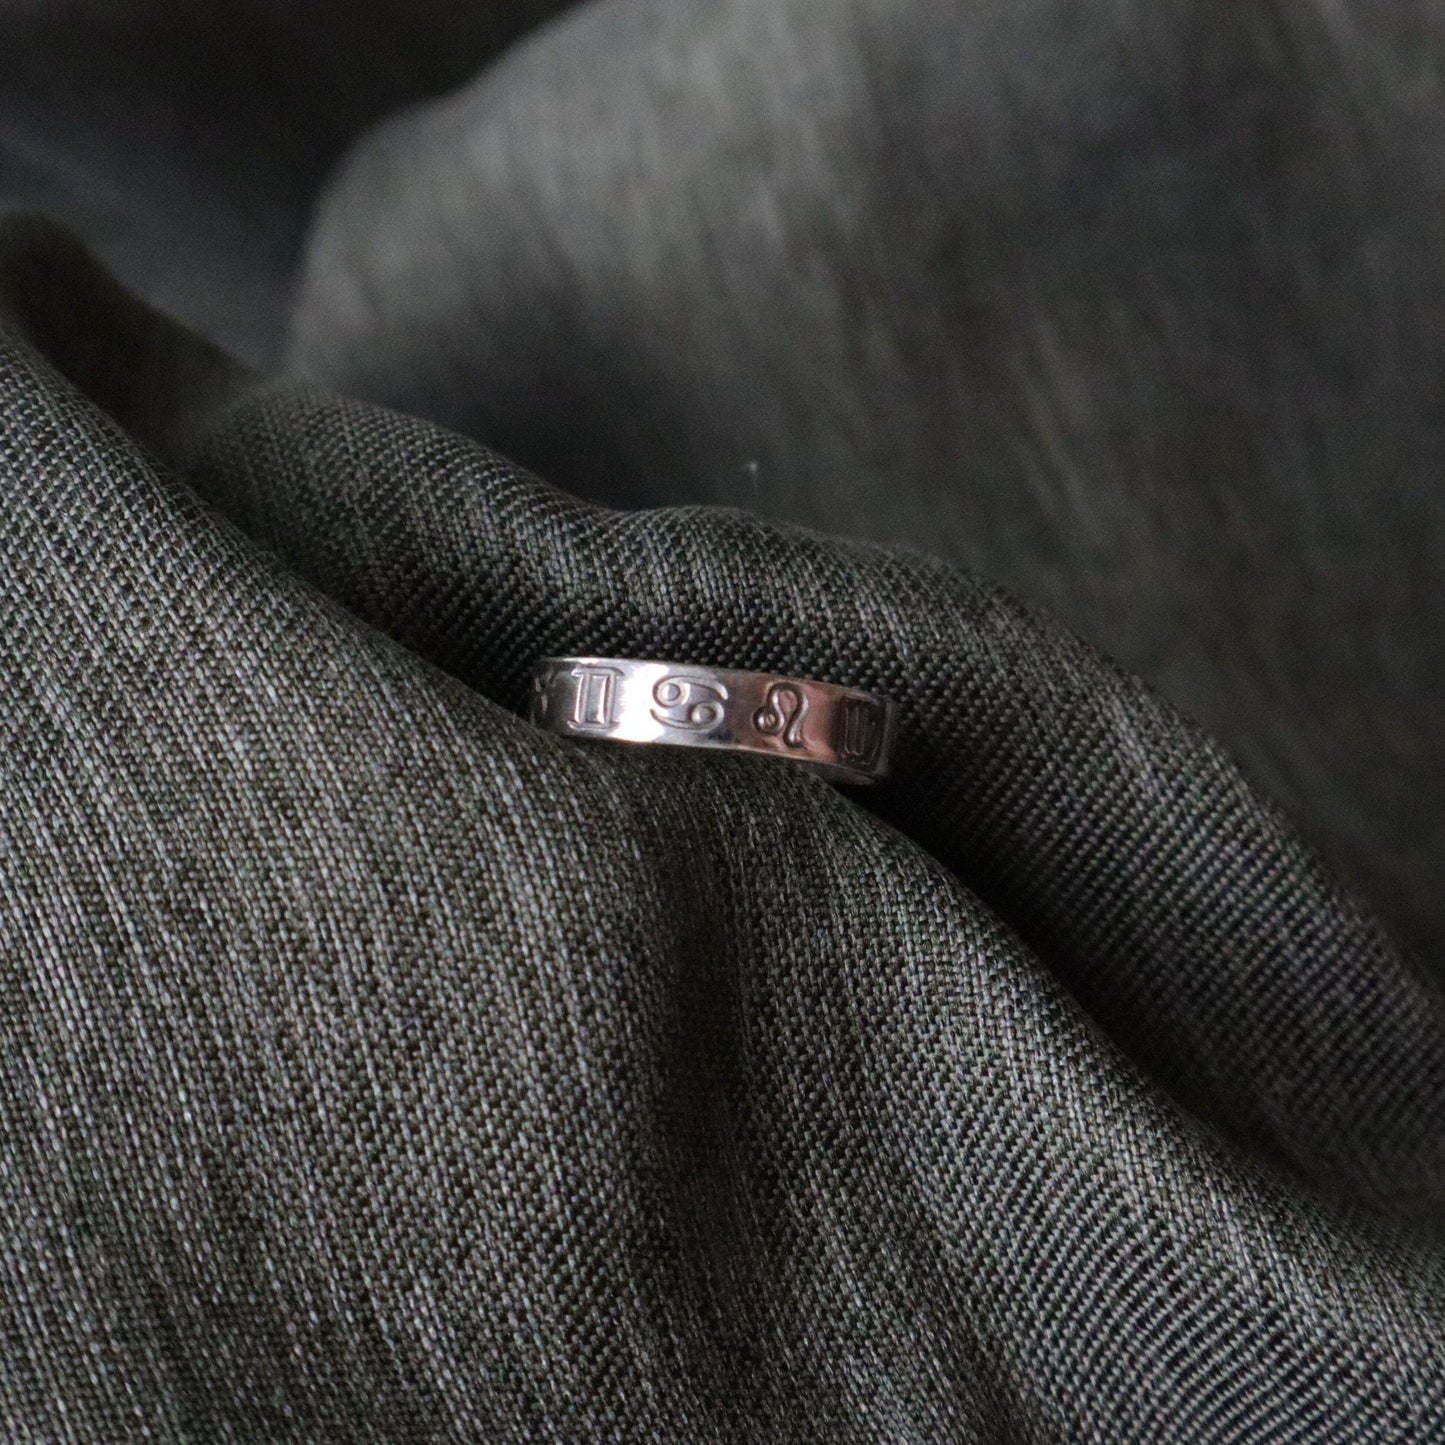 A thick band ring with all 12 zodiac signs stamped onto it.